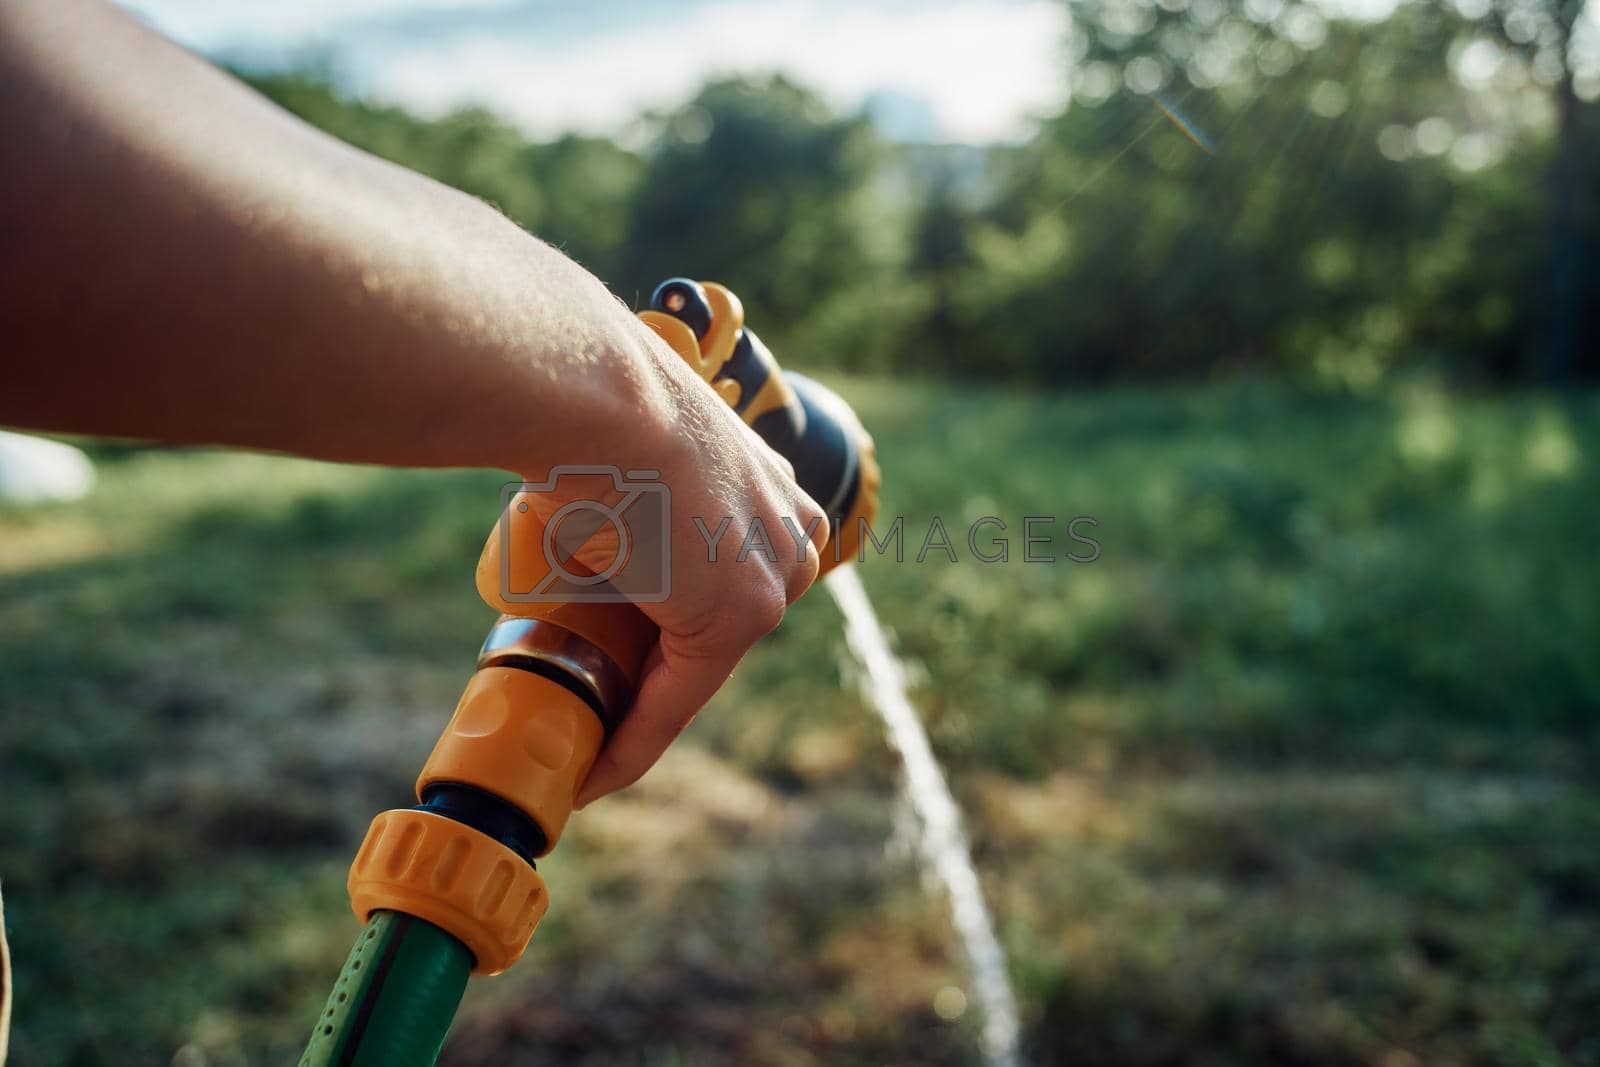 Royalty free image of watering plants with garden hose nature agriculture cultivation by Vichizh